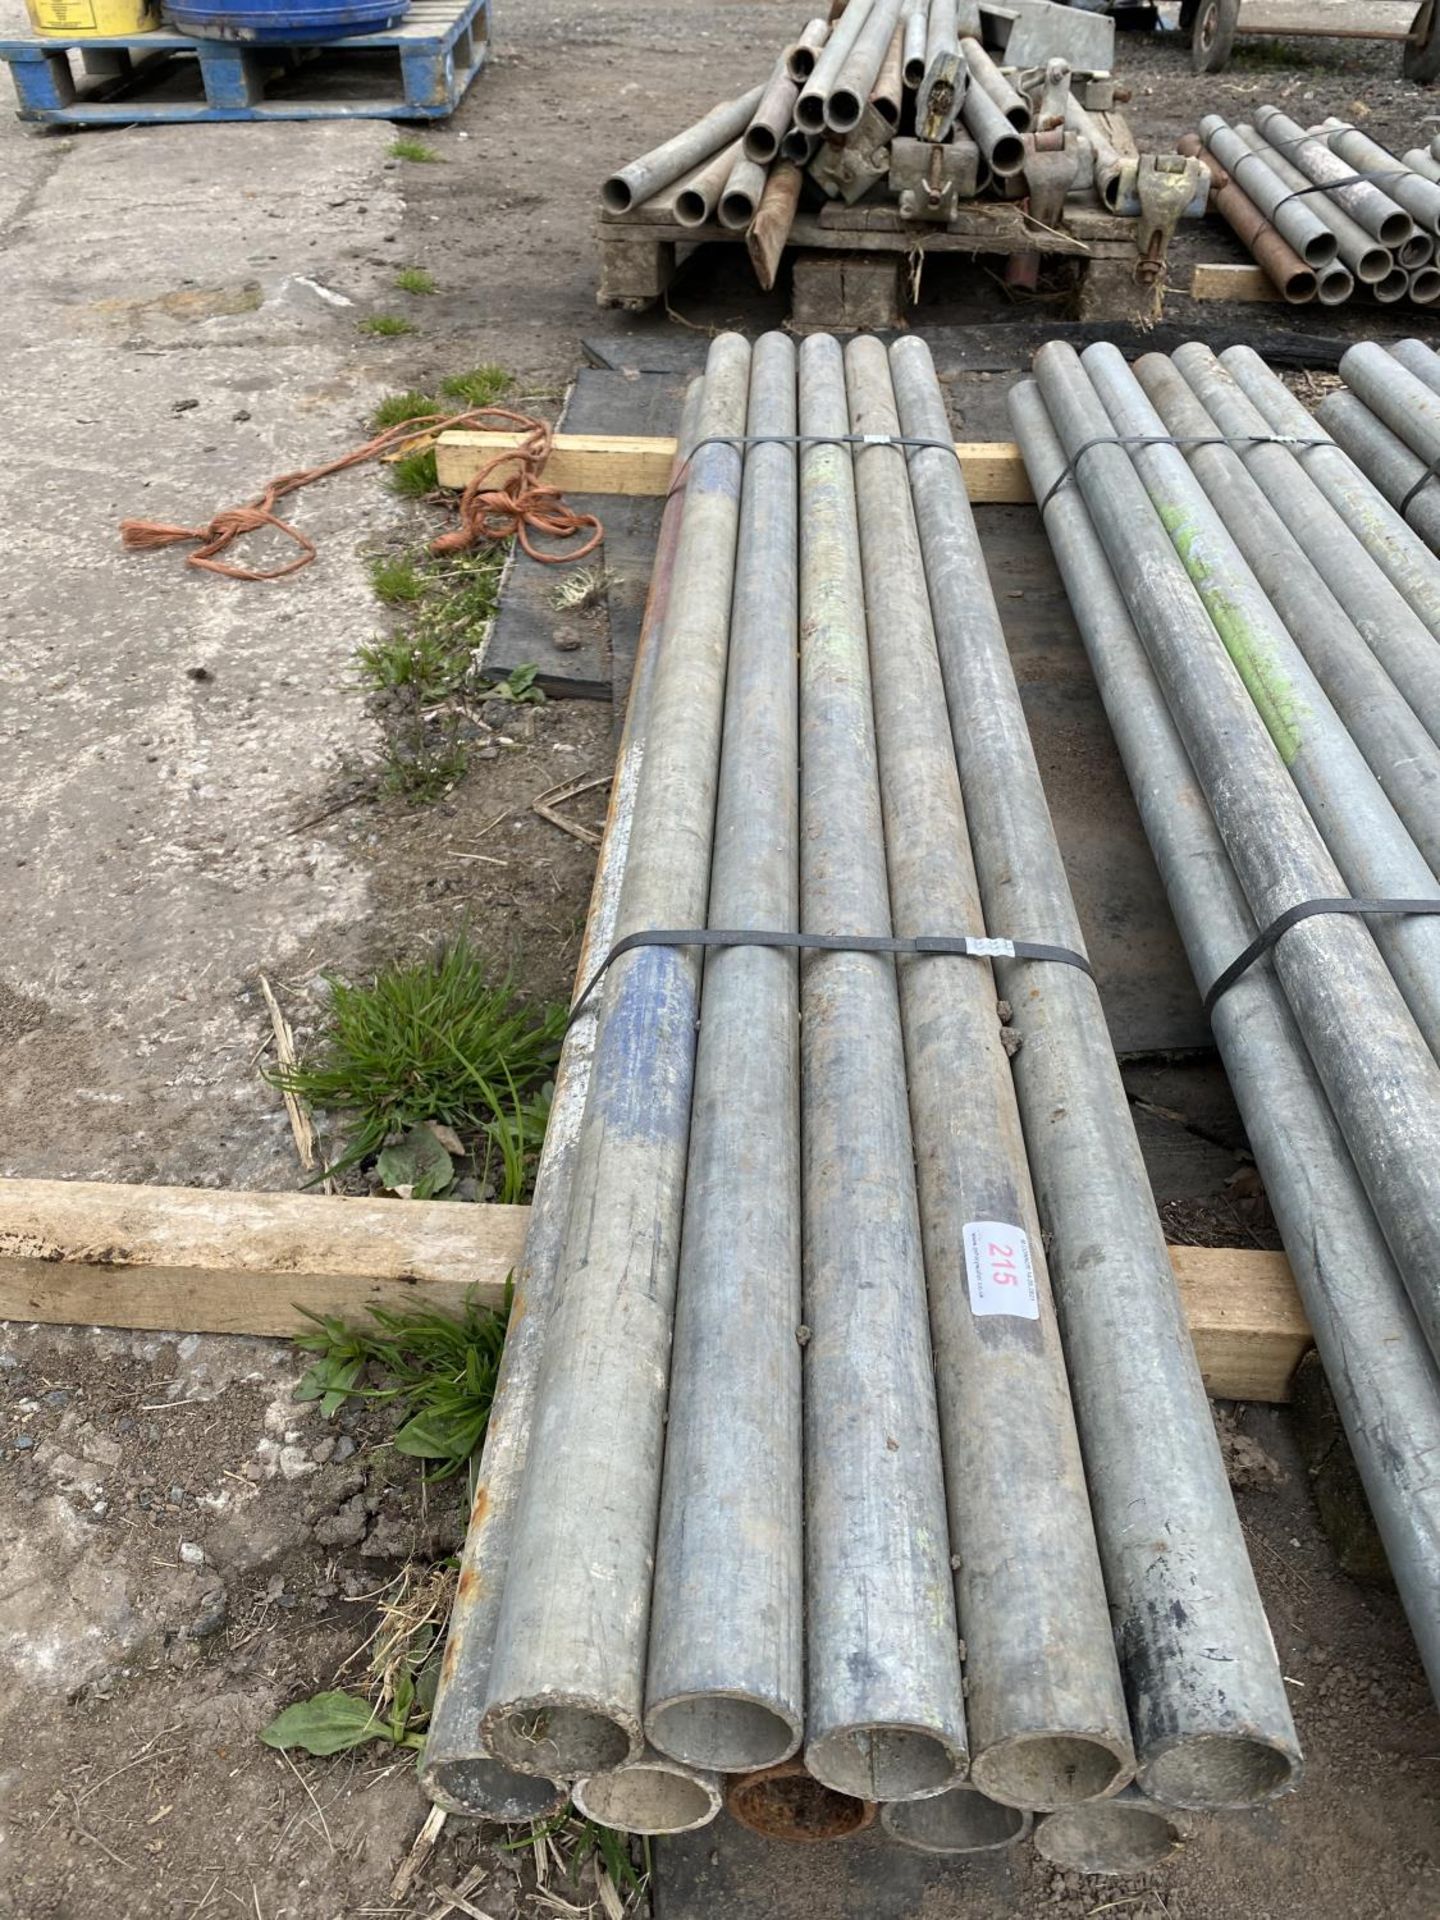 SCAFFOLD PIPES 5' LONG TO BE SOLD PER PIPE WITH THE OPTION ON THE FOLLOWING PIPES